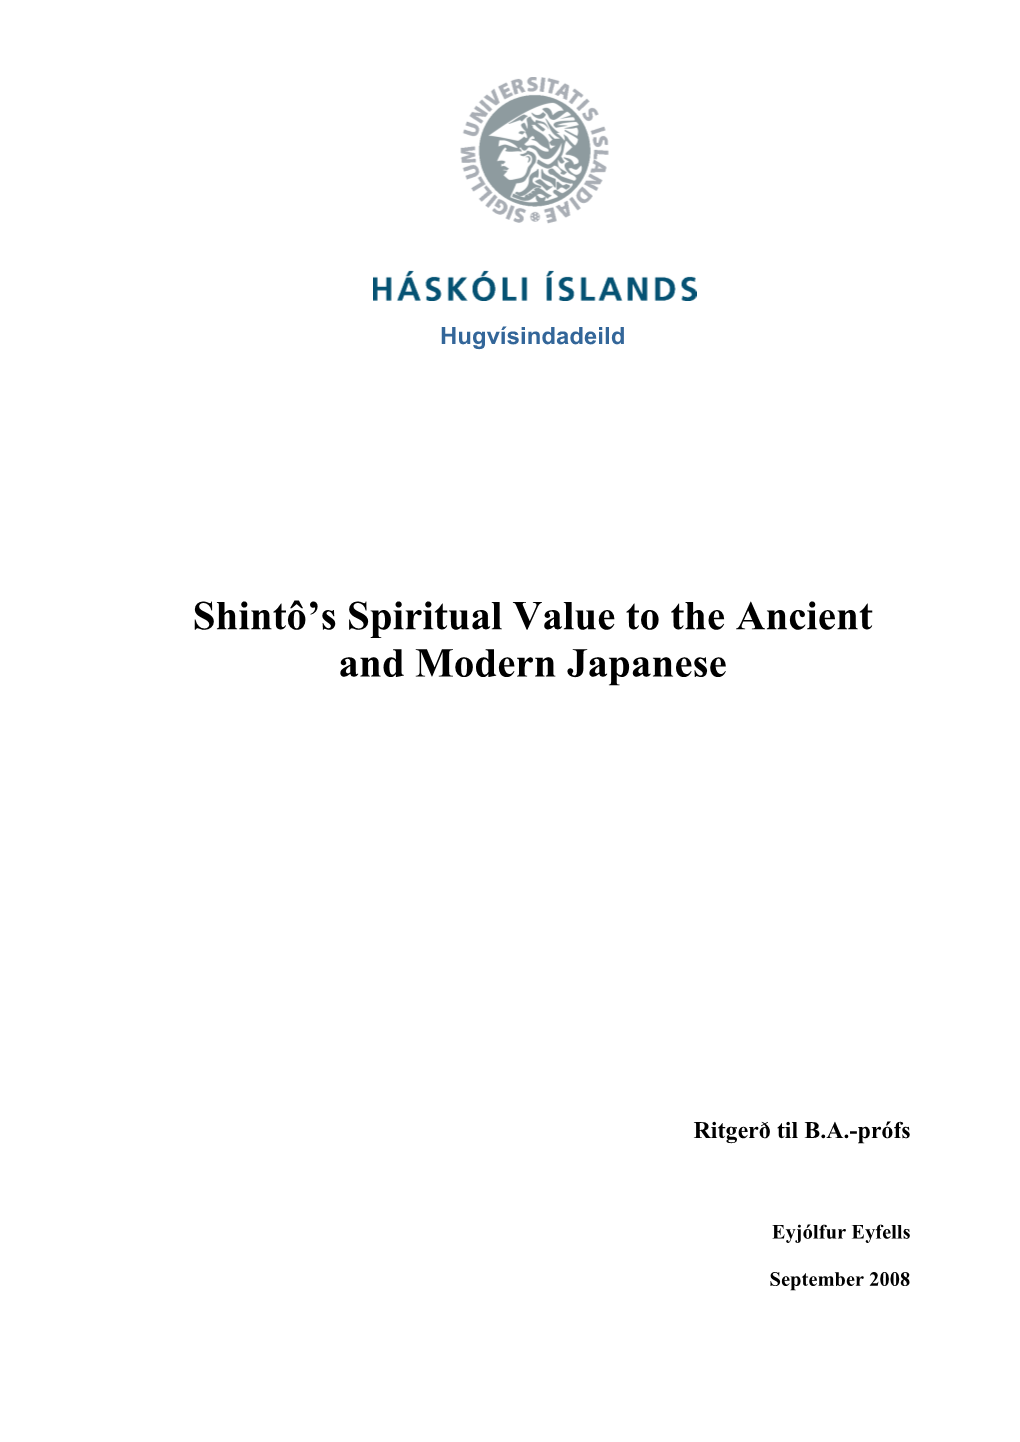 Shintô's Spiritual Value in the Past and Present